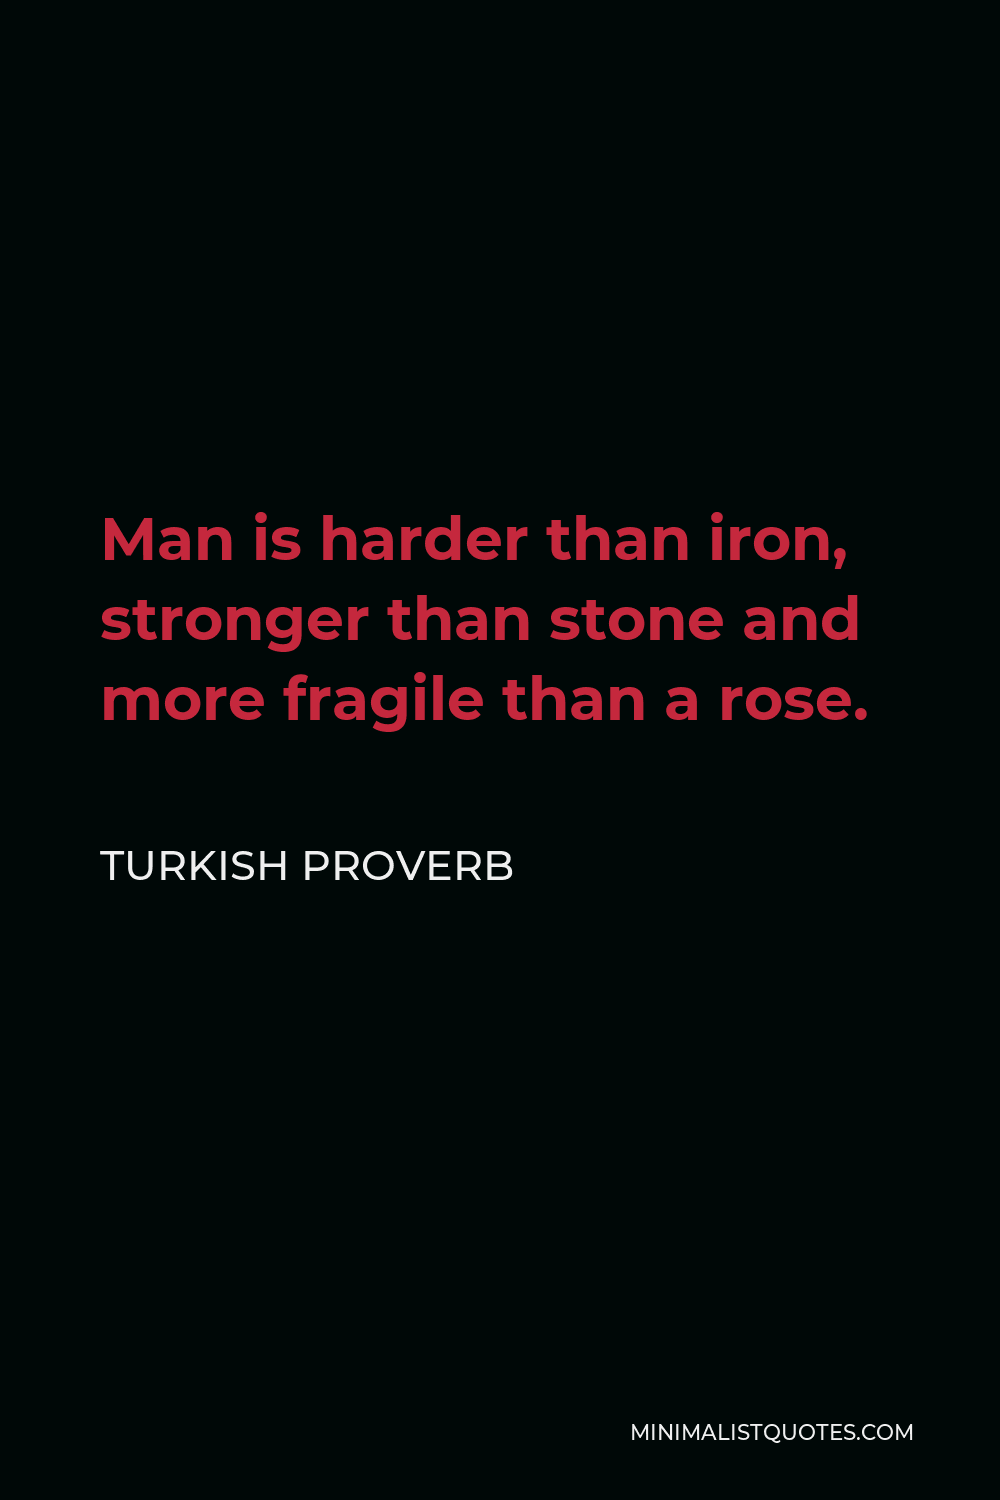 Turkish Proverb Quote - Man is harder than iron, stronger than stone and more fragile than a rose.